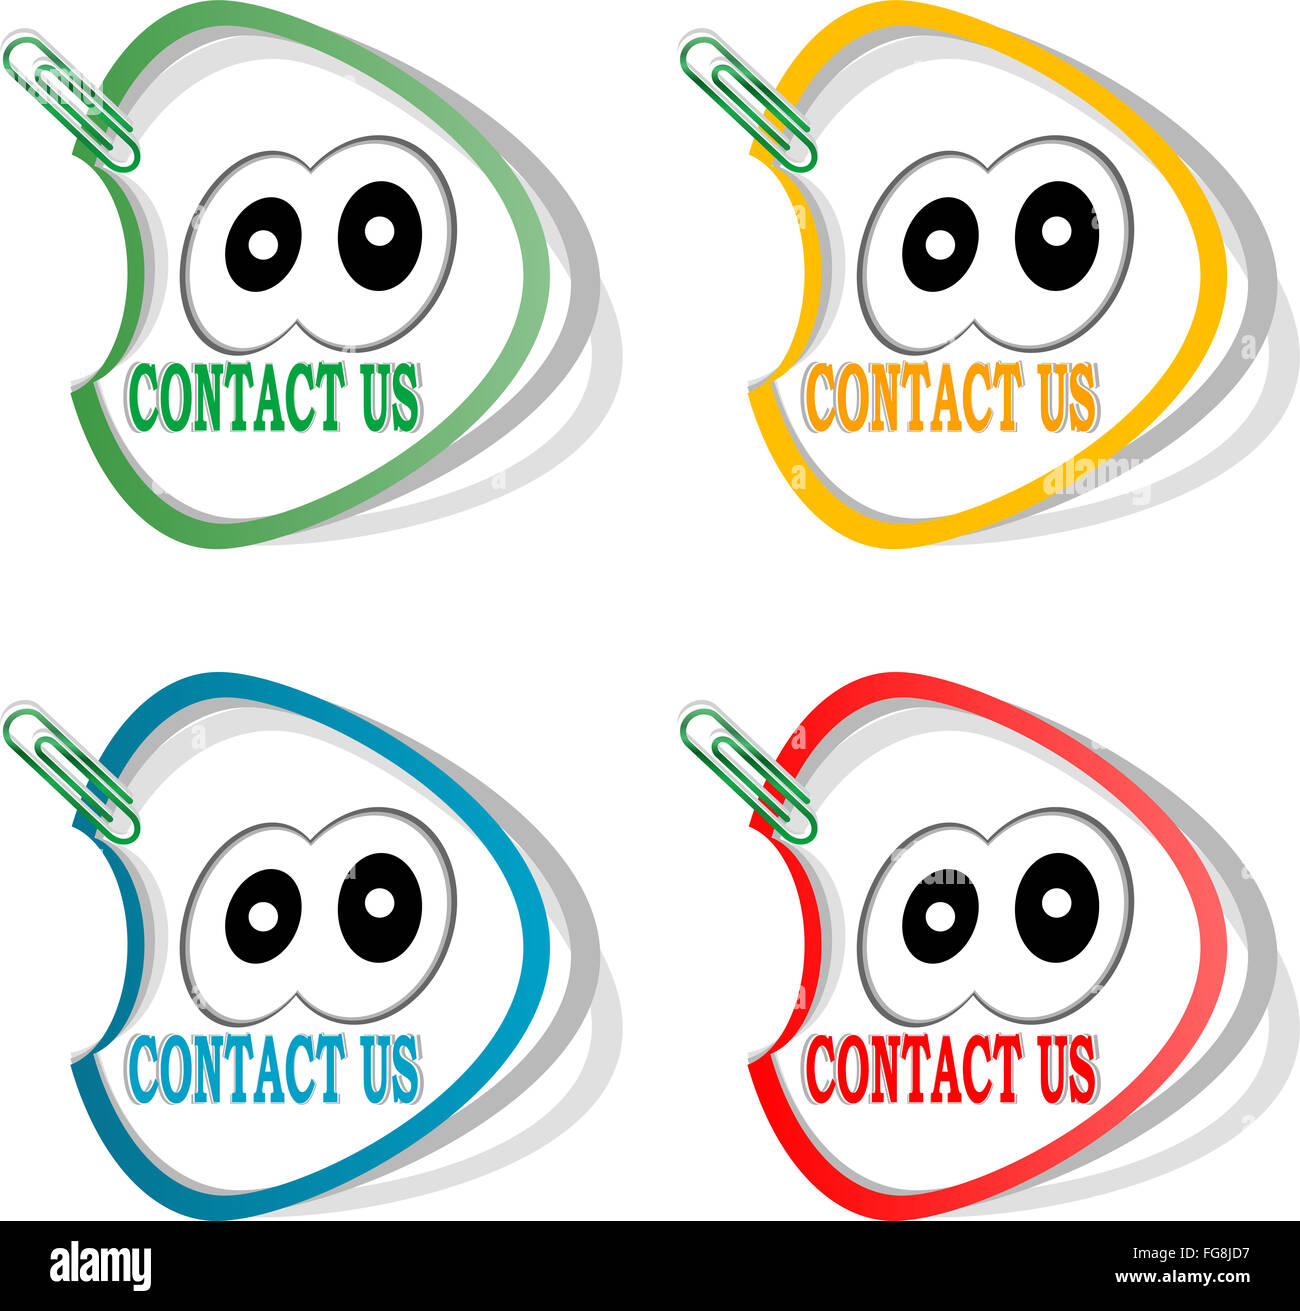 Contact us labels and cute cartoon eyes, stickers for the web page Stock Photo